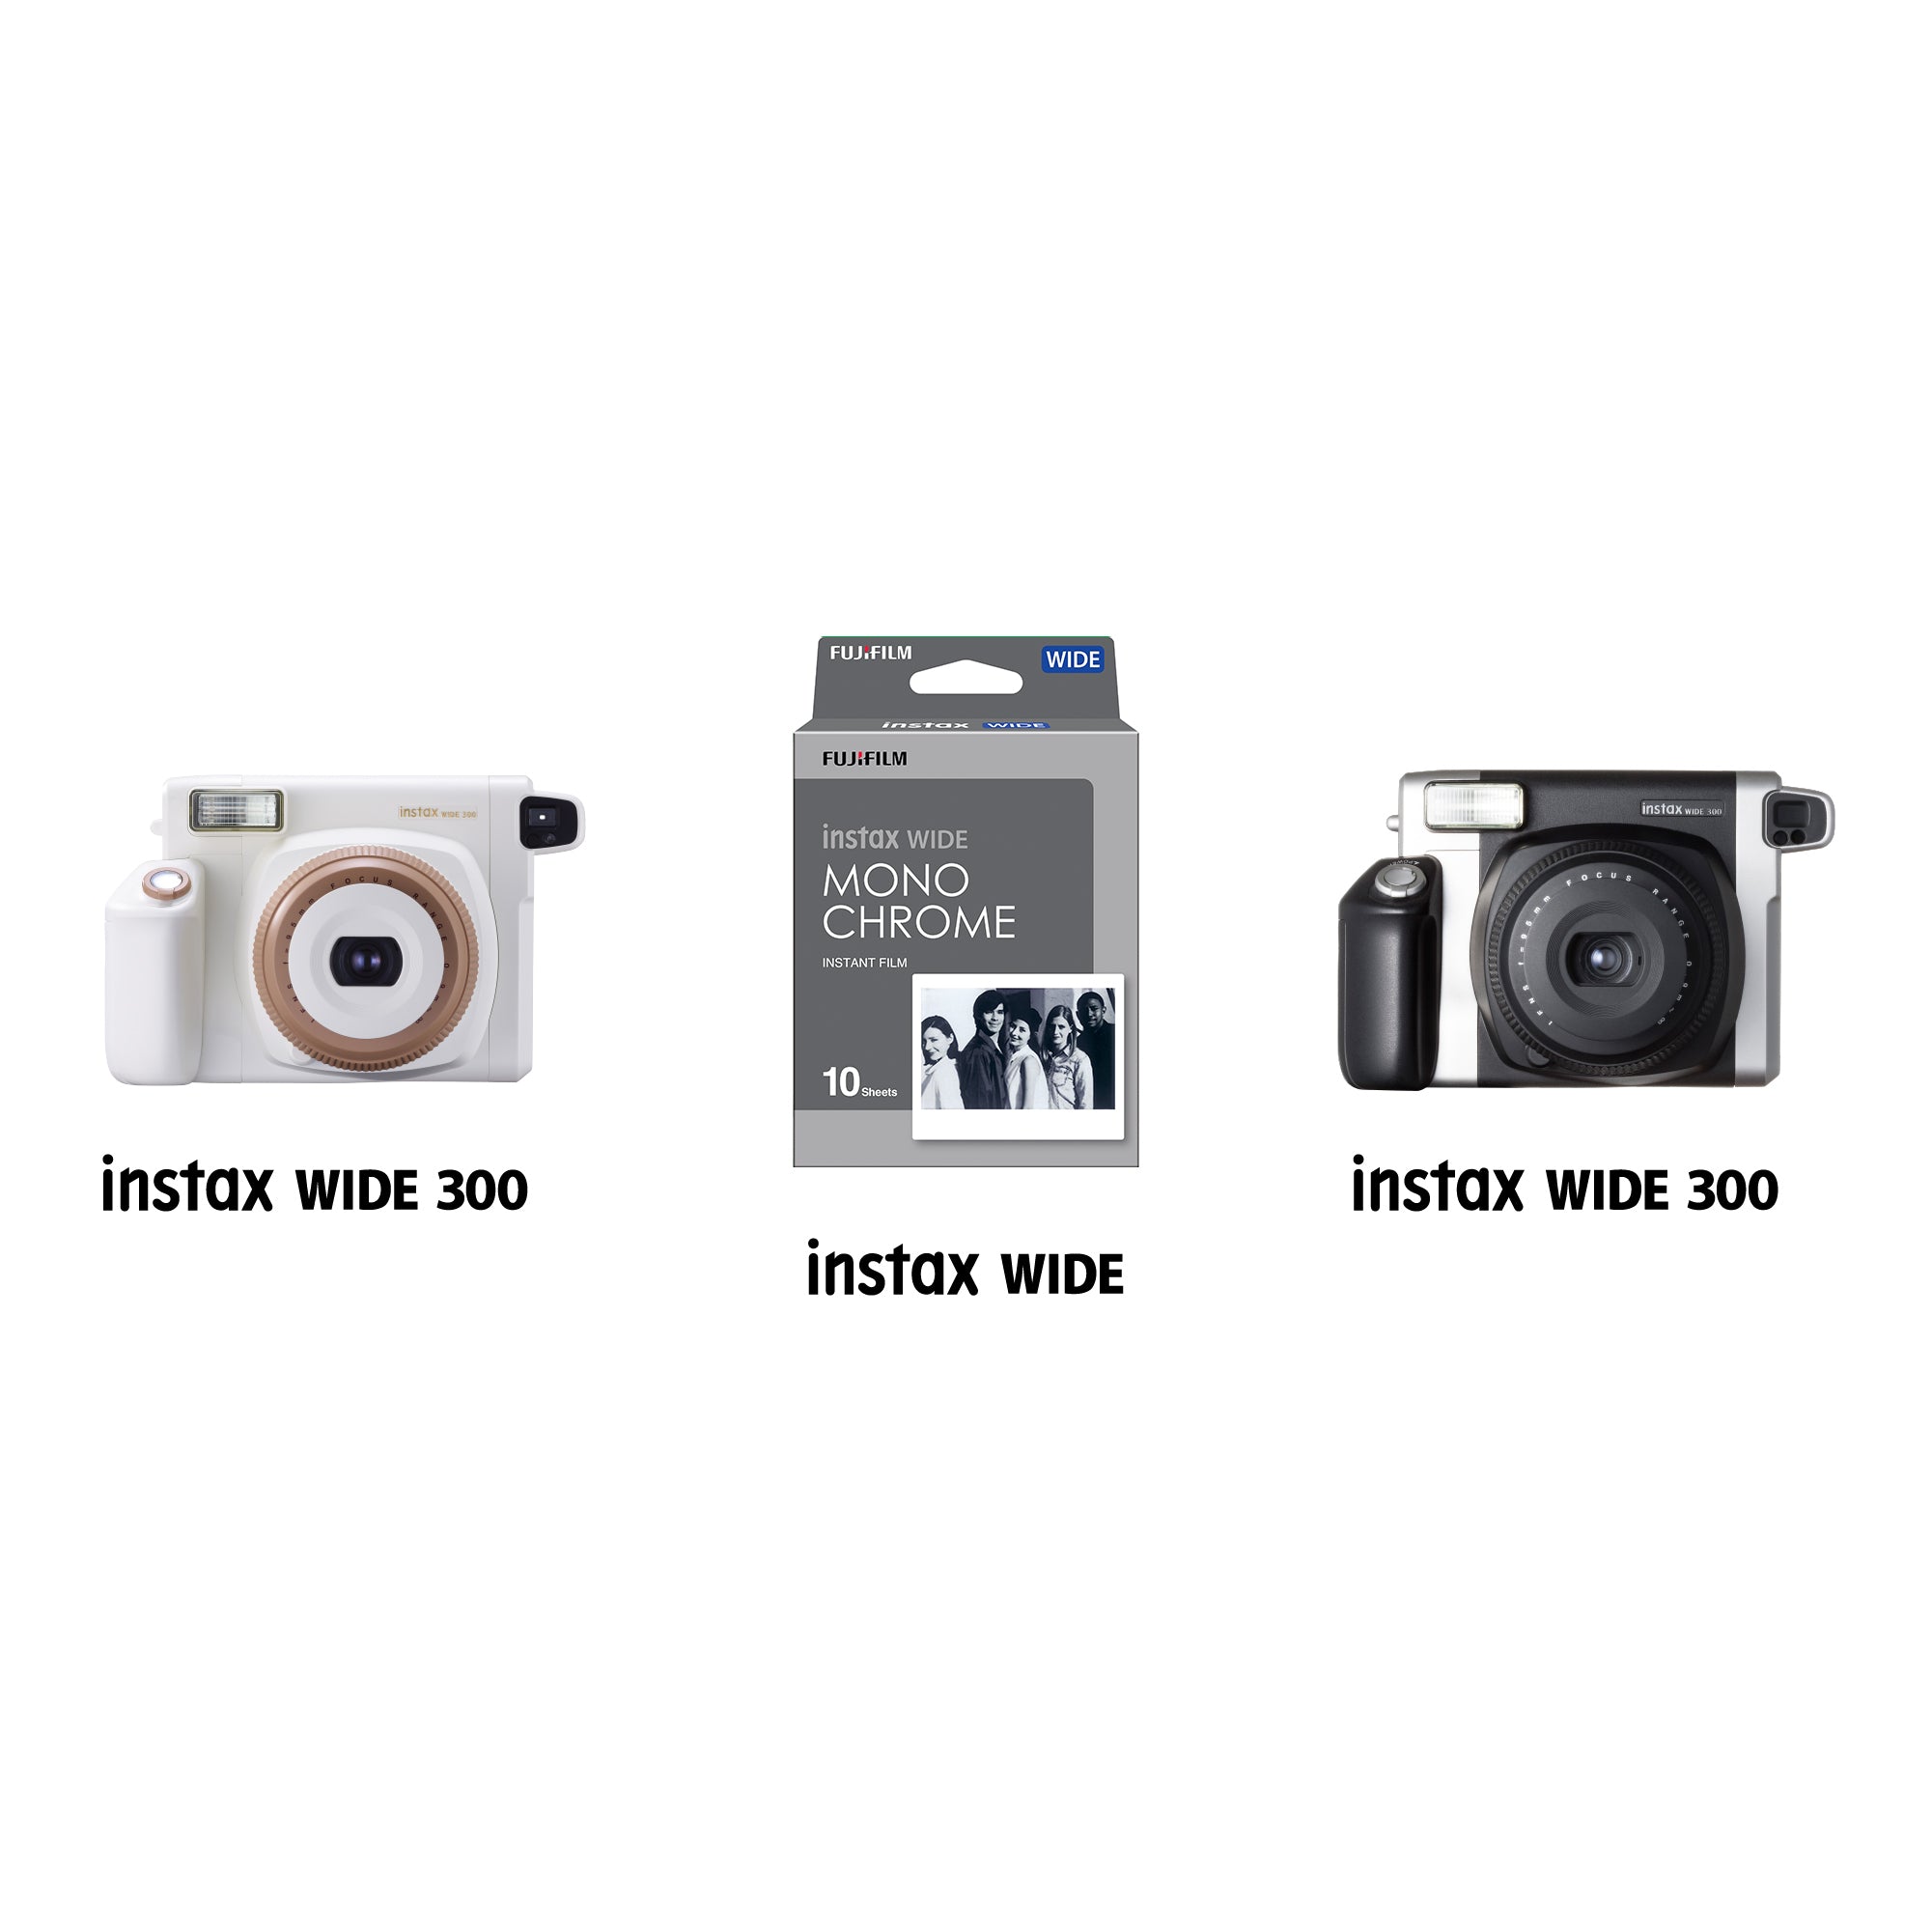 Instax Wide 300, Wide Prints, Close-Up Lens